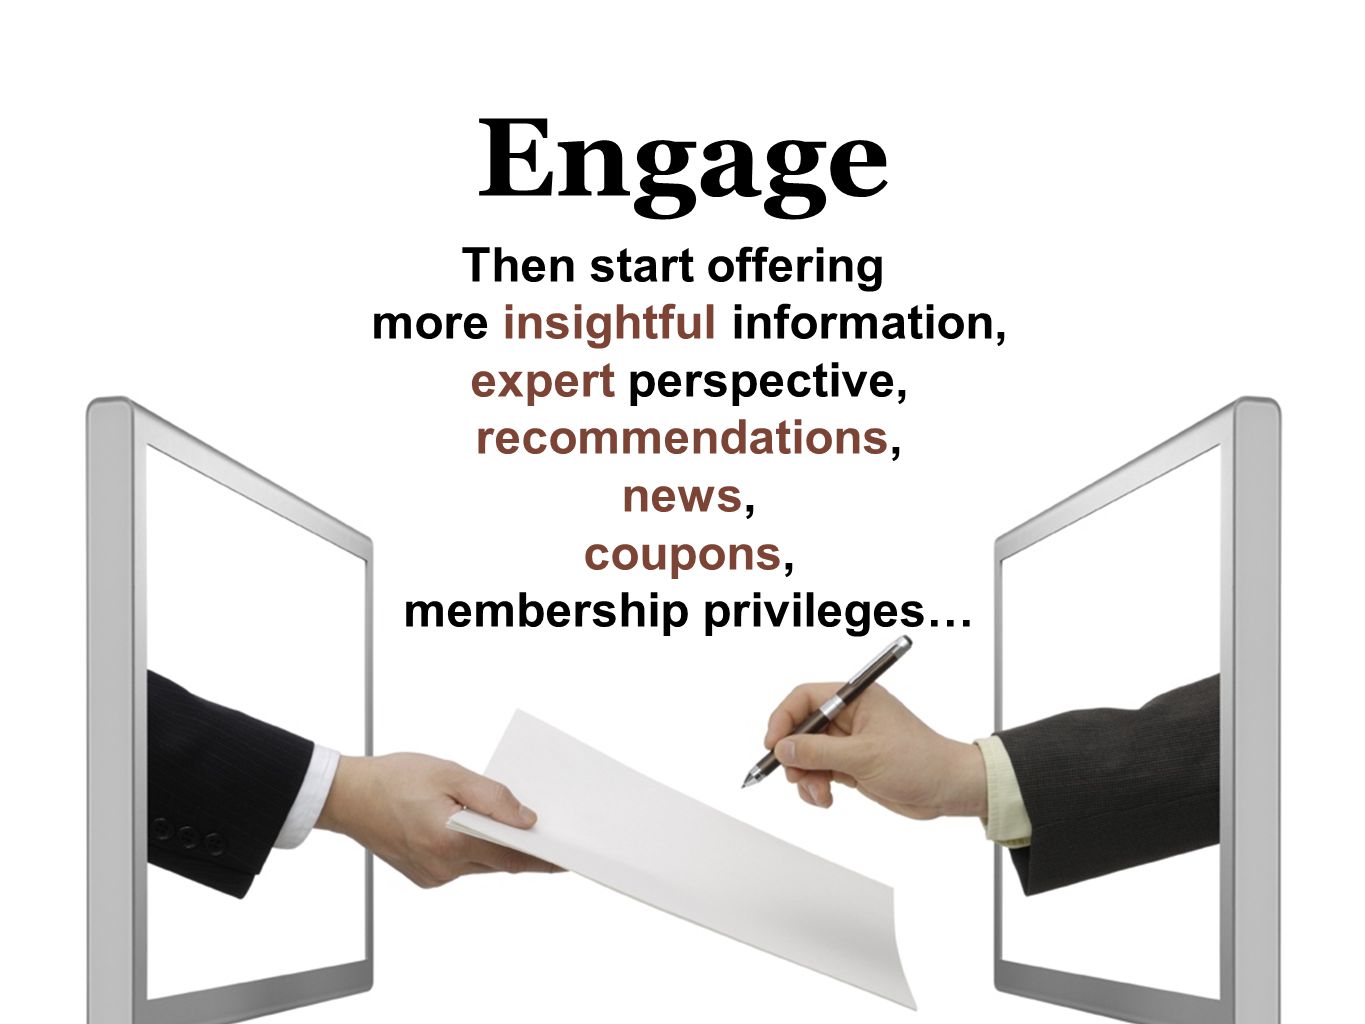 Engage Then start offering more insightful information, expert perspective, recommendations, news, coupons, membership privileges…